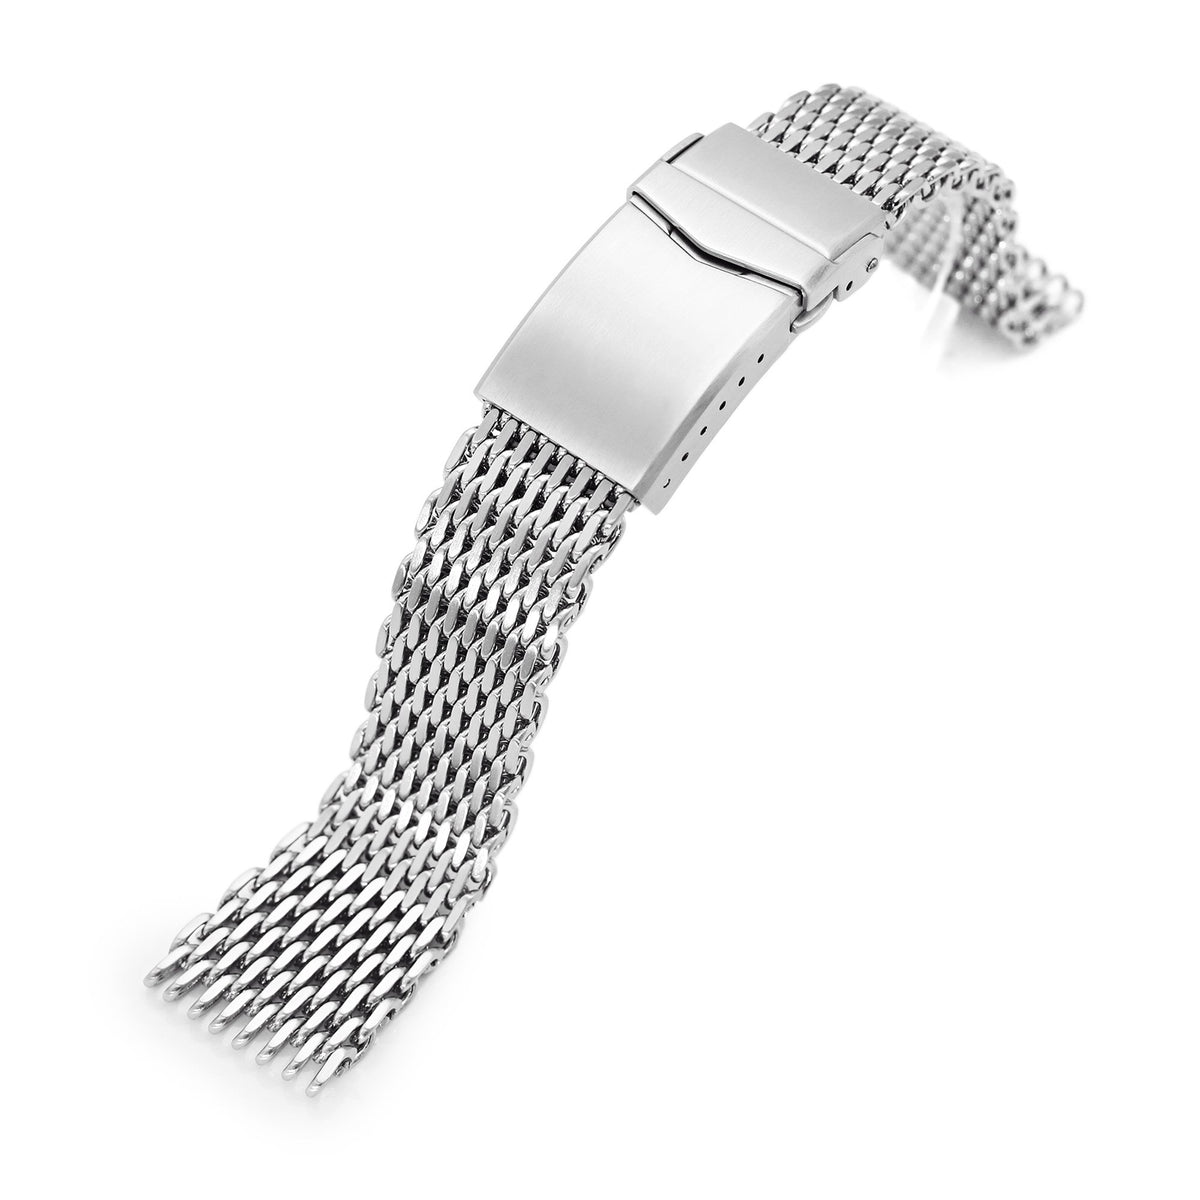 22mm Tapered &quot;SHARK&quot; Mesh Band Stainless Steel Watch Bracelet V-Clasp Brushed Strapcode Watch Bands